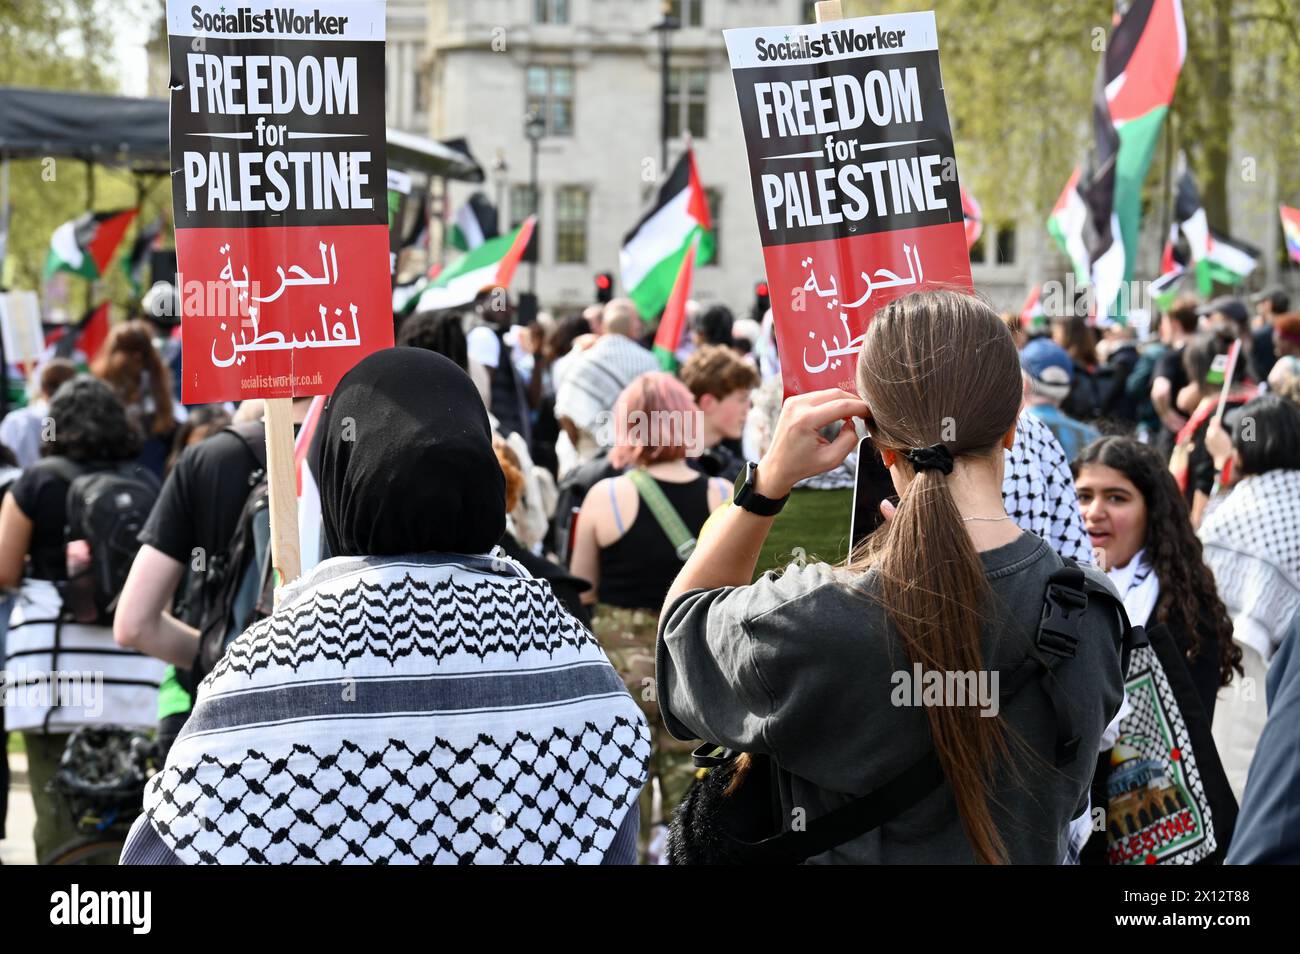 Freedom for Palestine March and Rally, Westminster, Londra, Regno Unito Foto Stock